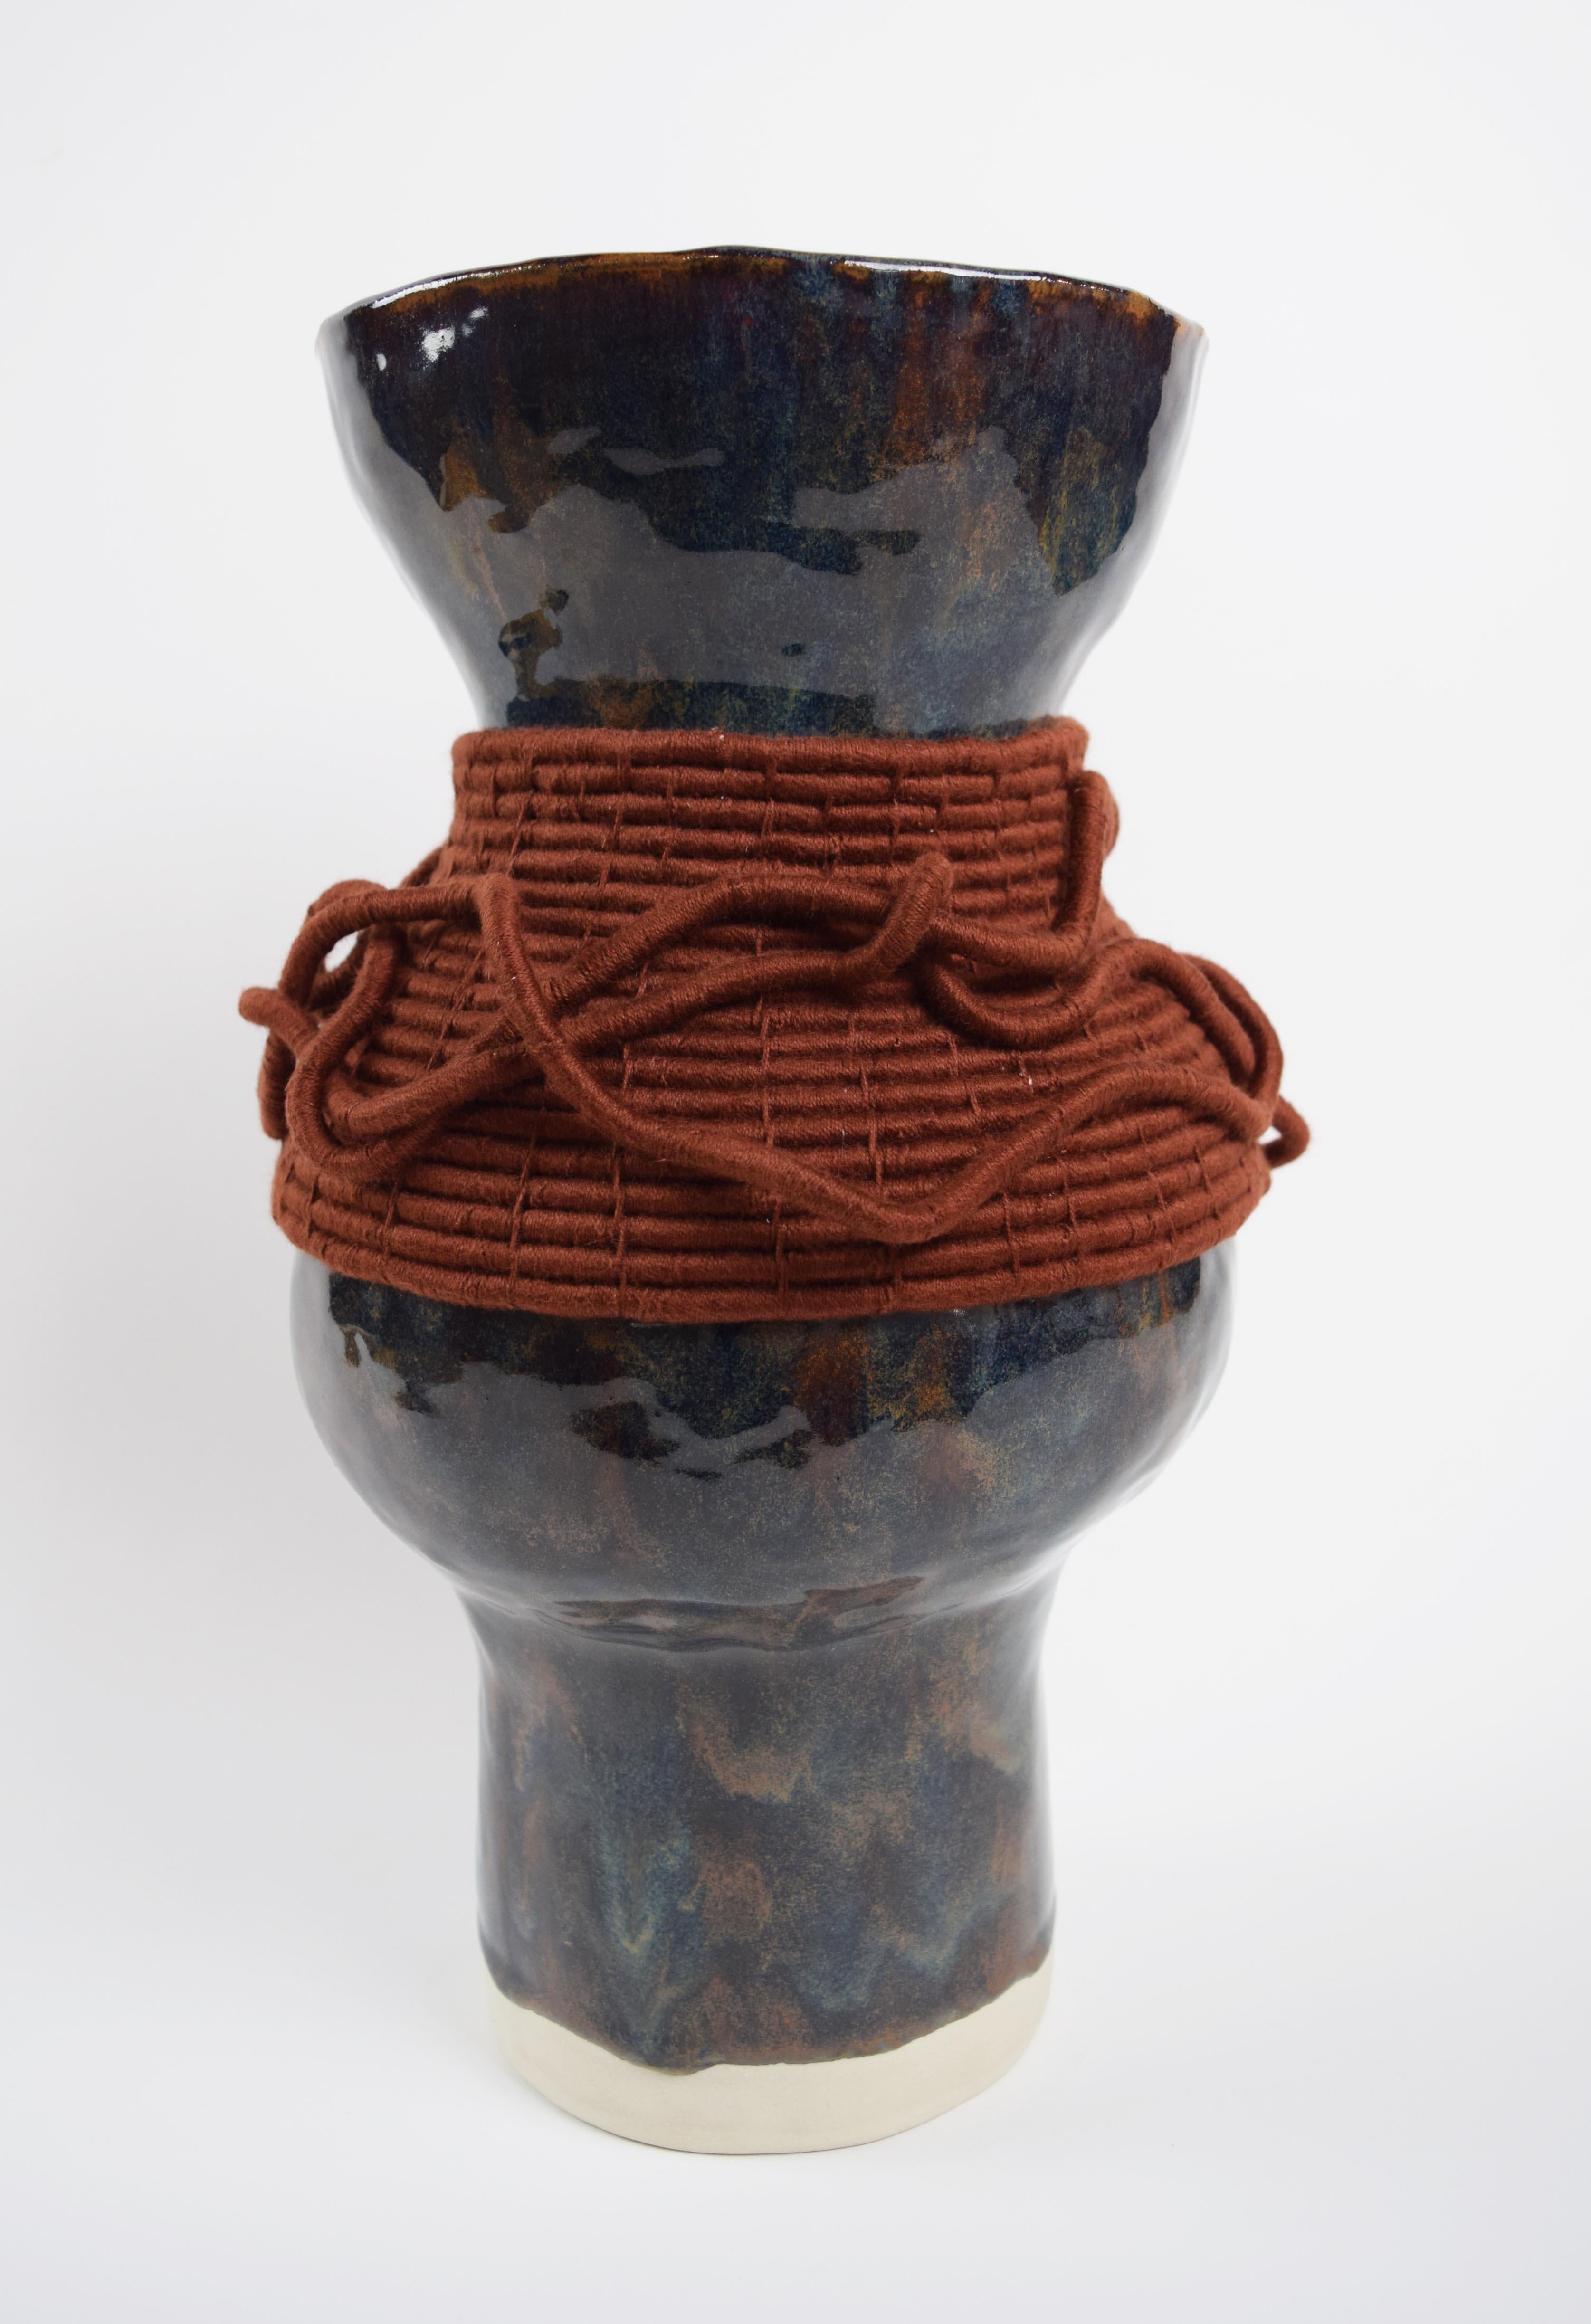 Organic Modern One of a Kind Ceramic and Woven Cotton Vase #728 in Brown with Rust Details